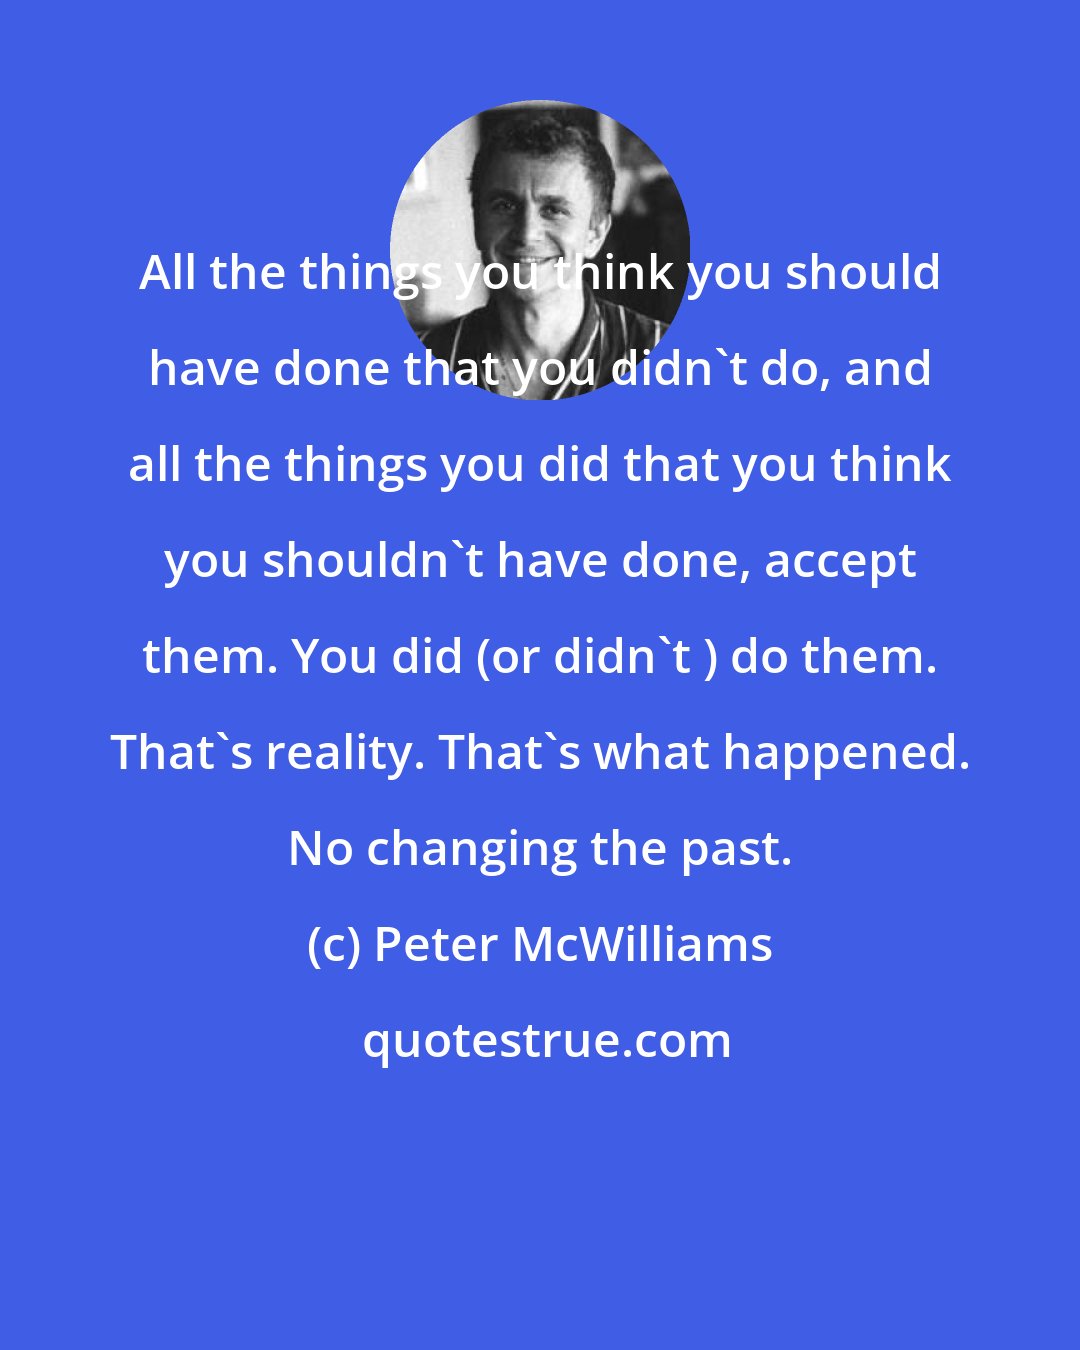 Peter McWilliams: All the things you think you should have done that you didn't do, and all the things you did that you think you shouldn't have done, accept them. You did (or didn't ) do them. That's reality. That's what happened. No changing the past.